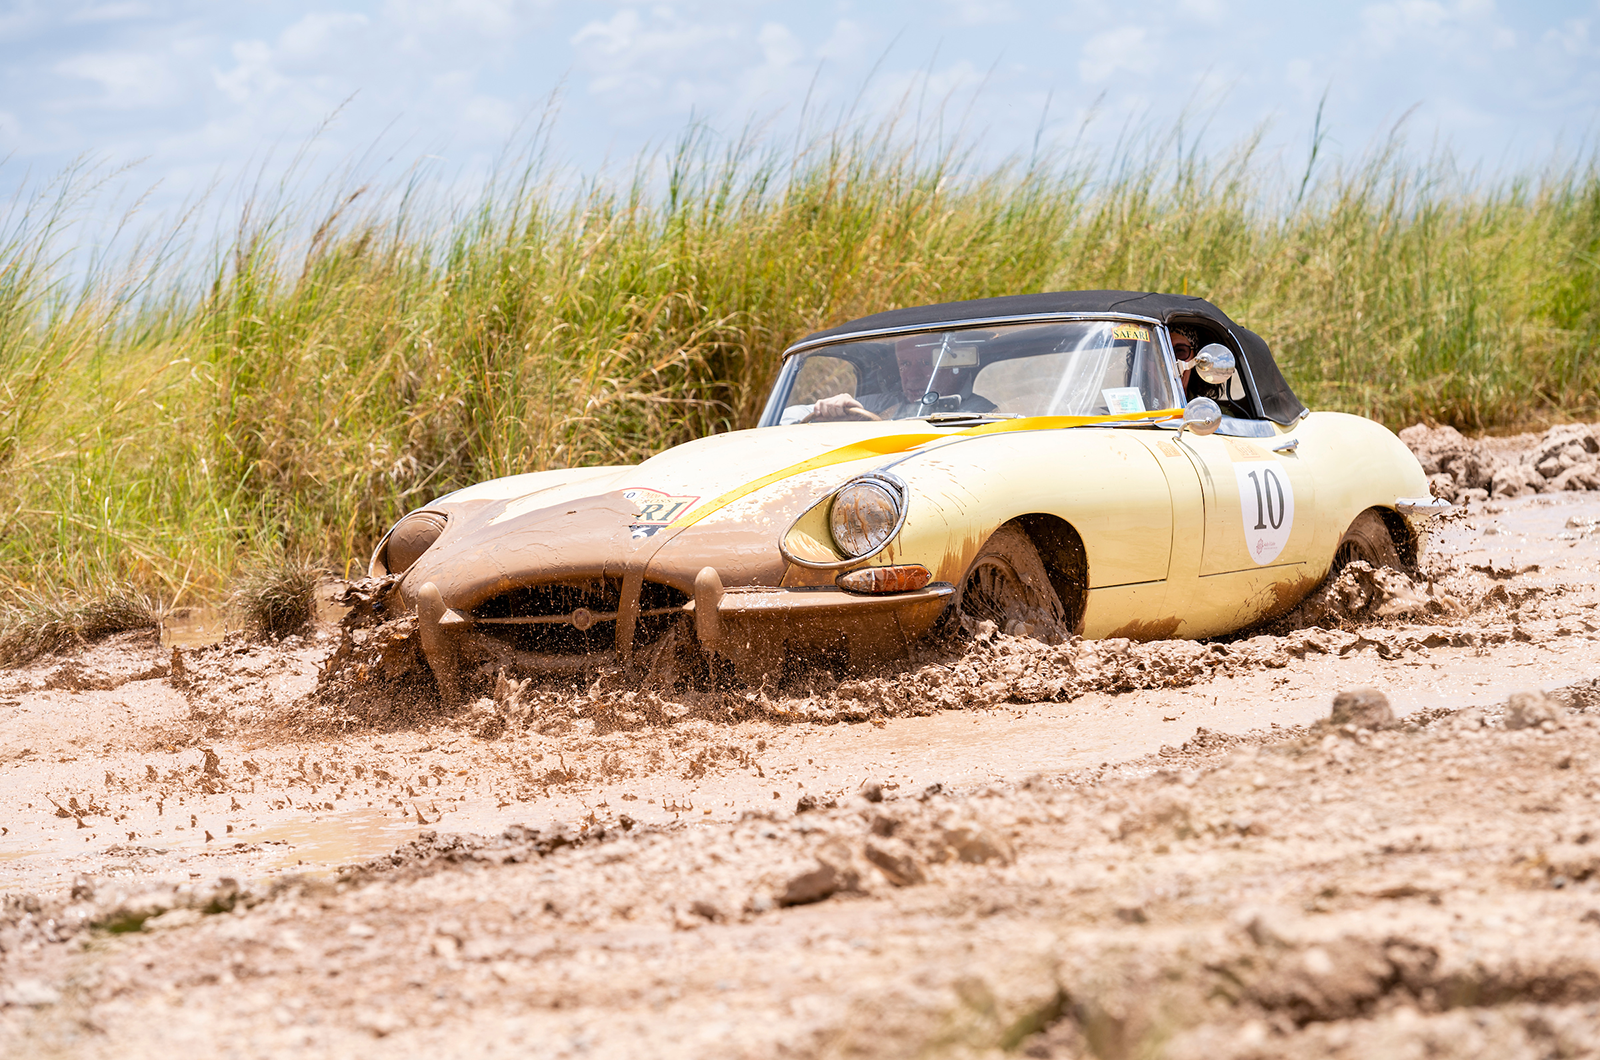 Clint and Dawn Smith’s E-type battles on